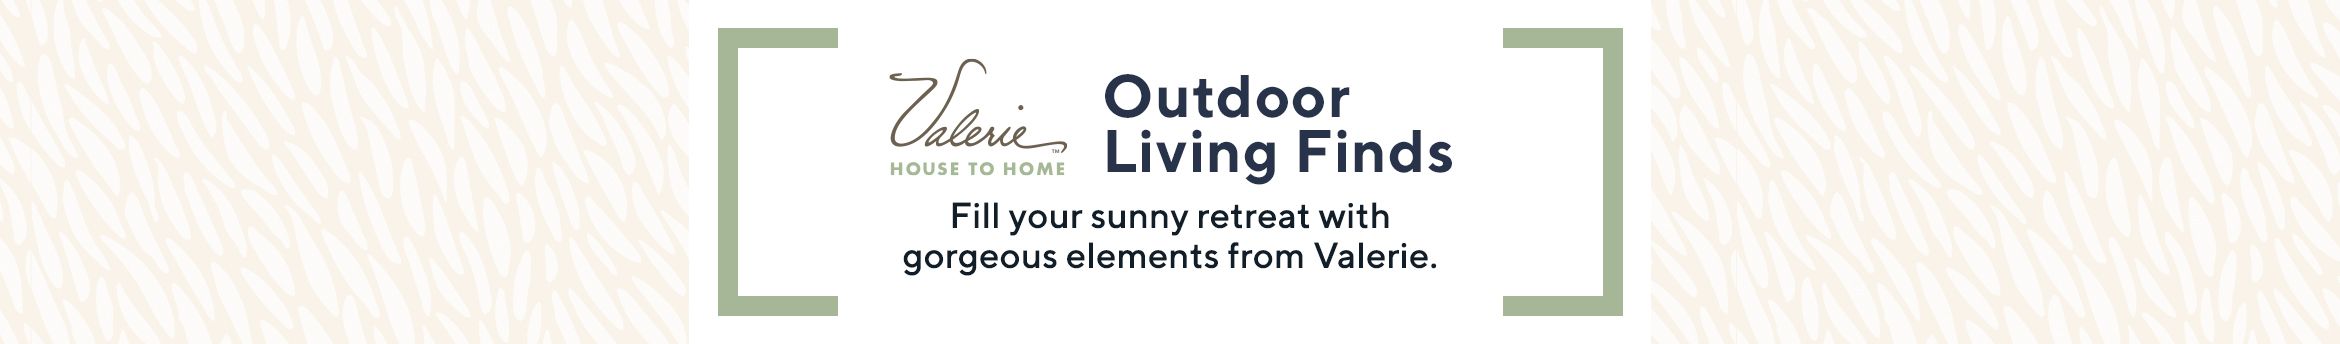 Valerie Parr Hill.  Outdoor Living Finds.  Fill your sunny retreat with gorgeous elements from Valerie.